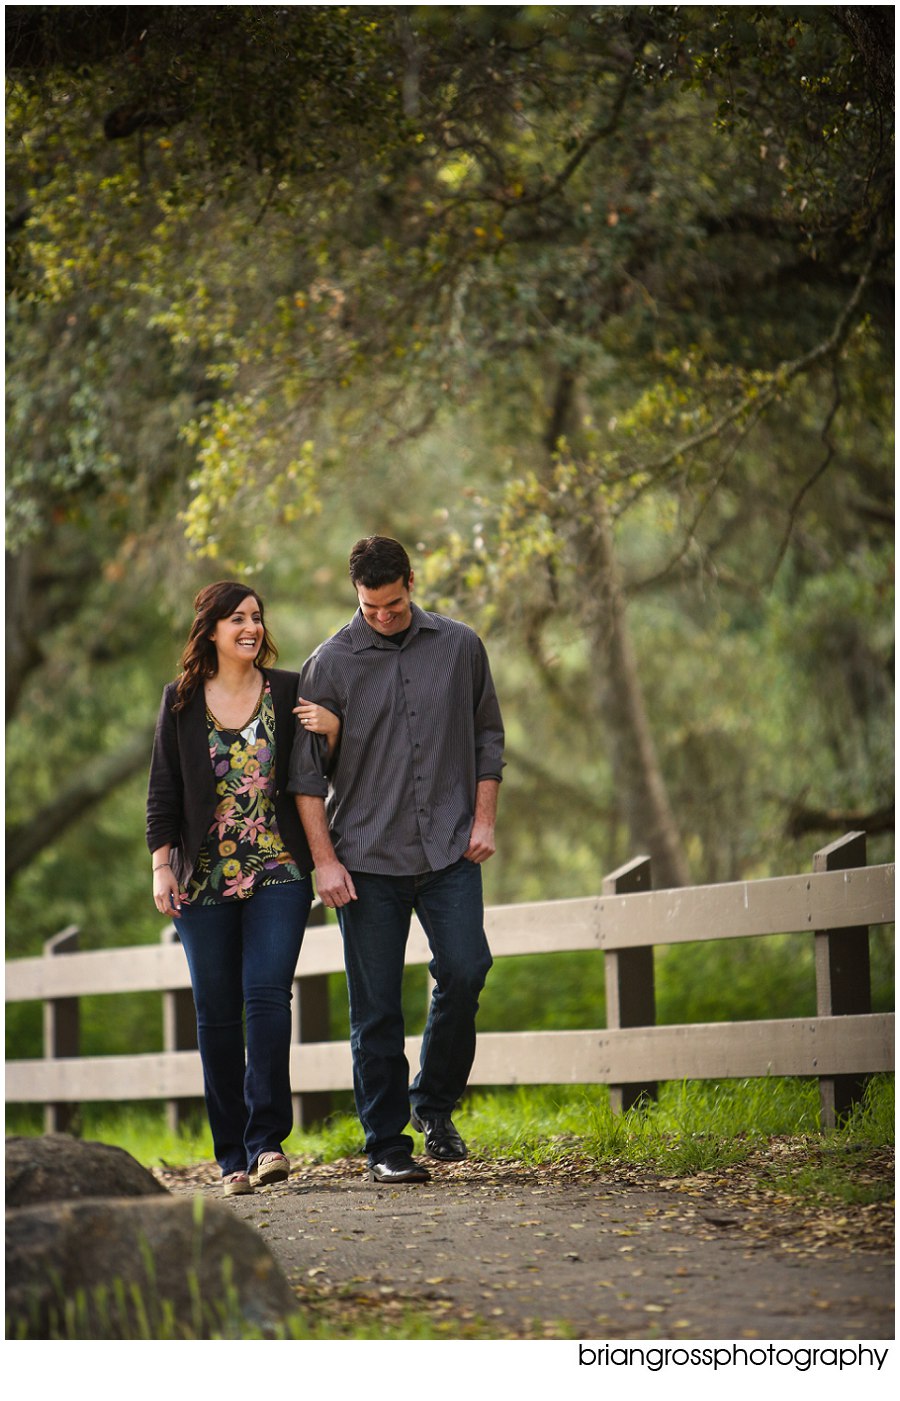 Rachael&Andy_Engagement_BrianGrossPhotography-142_WEB